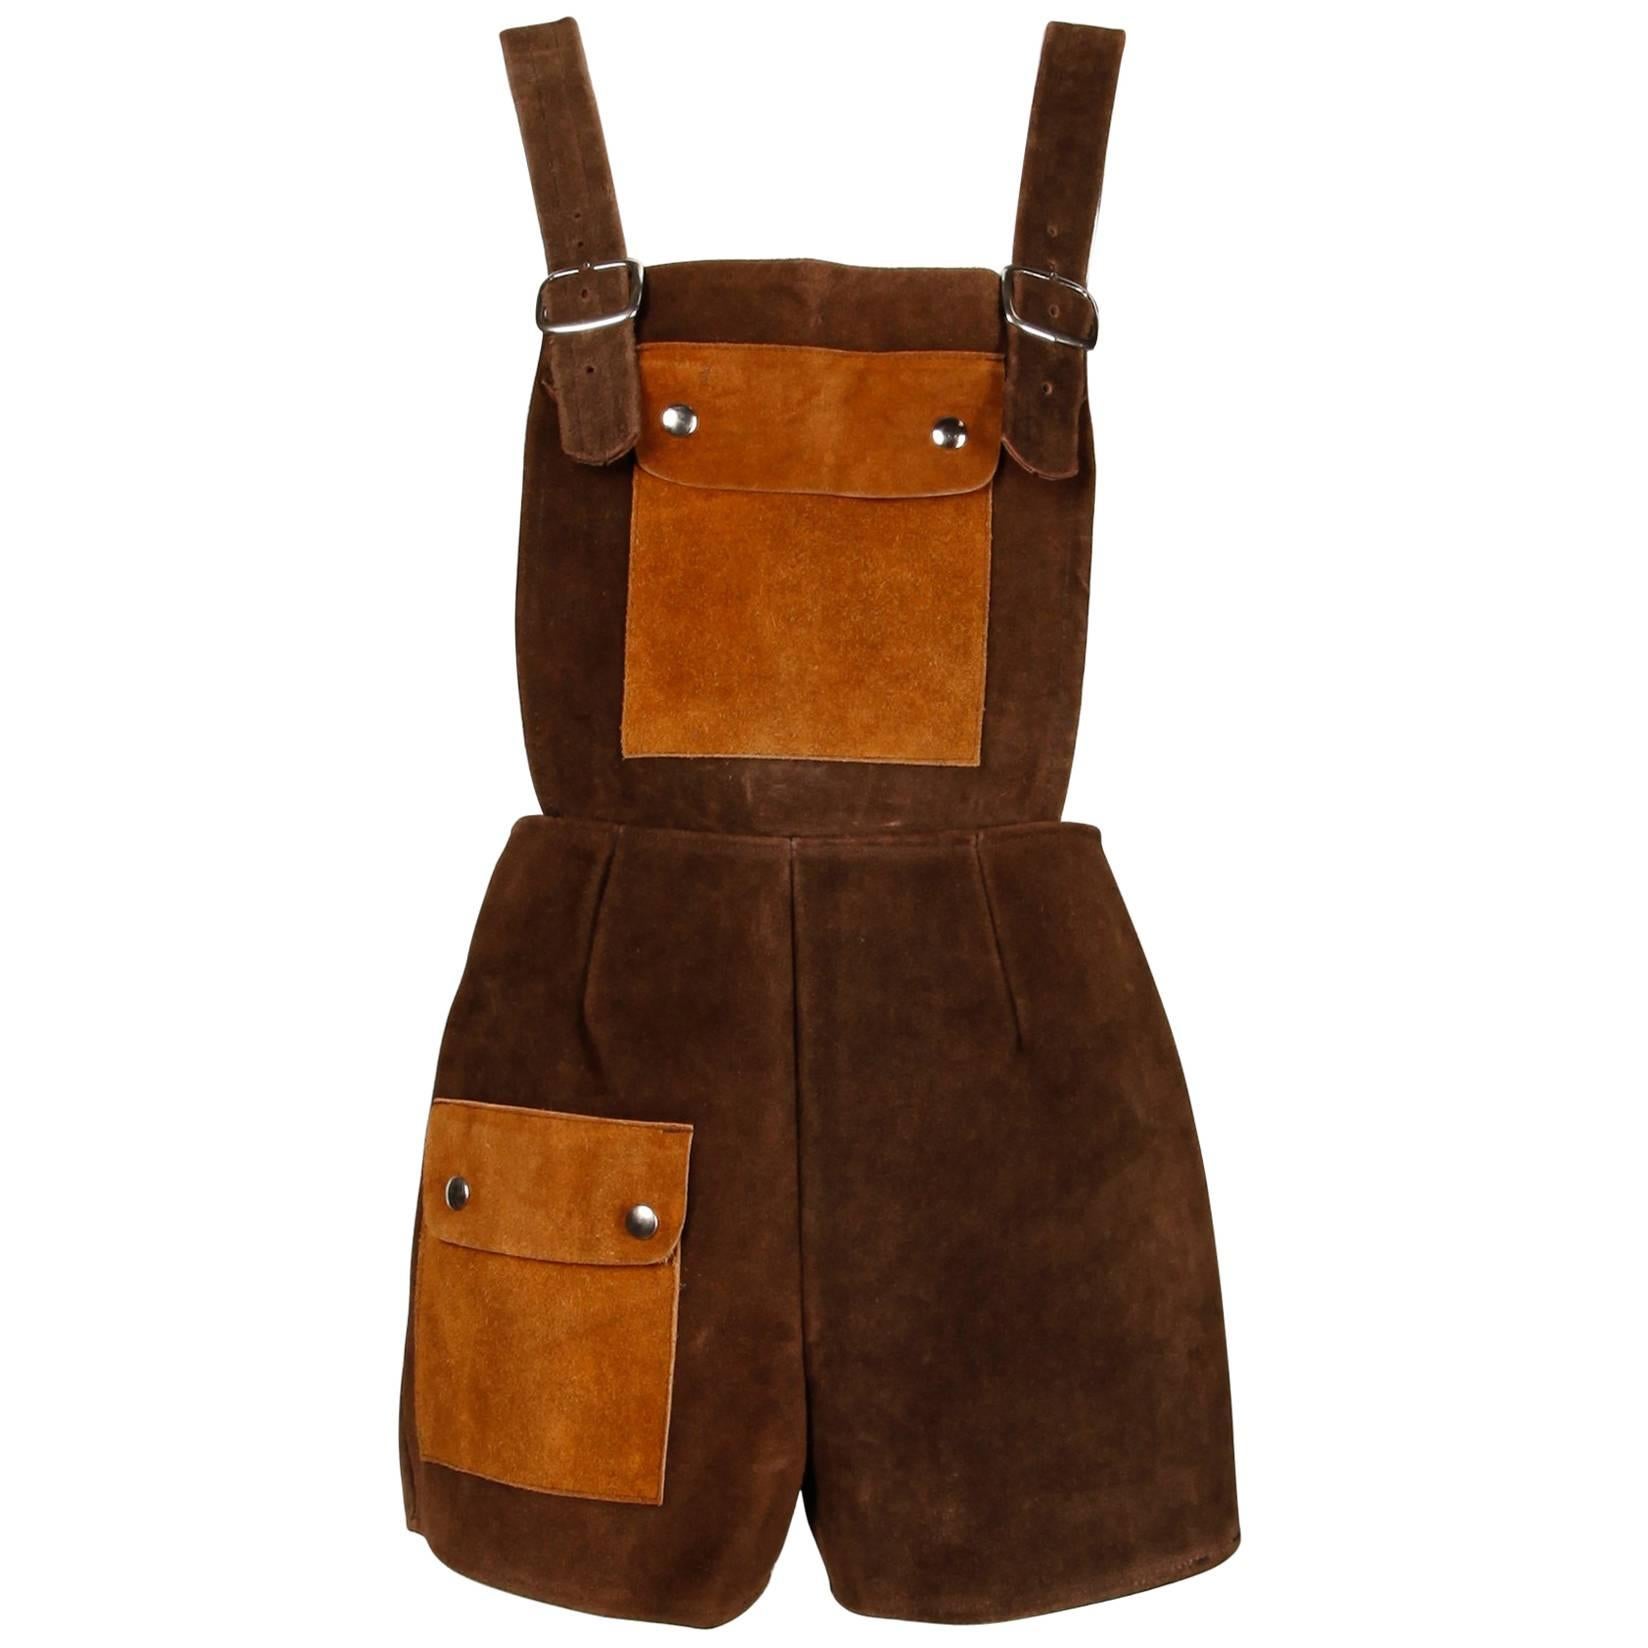 1970s Vintage Two-Tone Brown Suede Leather Shorts Overalls Onesie